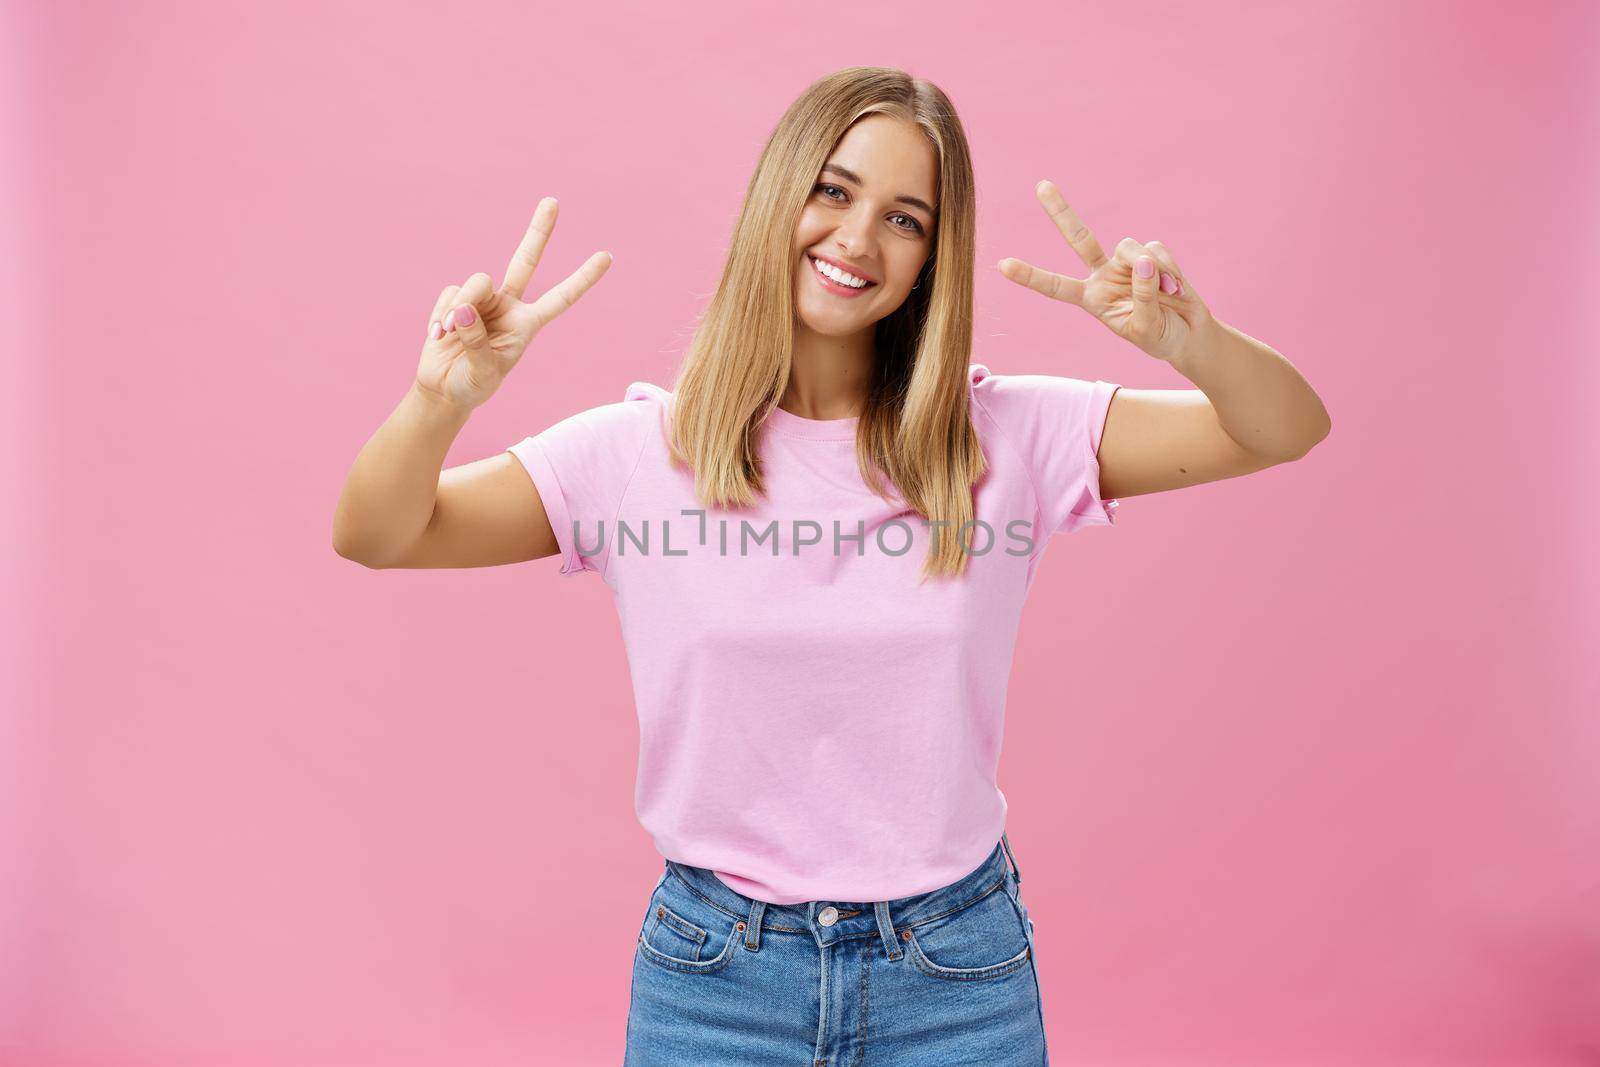 Cute chubby carefree young woman with short fair hair tilting head showing peace gestures with happy friendly smile having fun spending time amused and joyful against pink background. Copy space